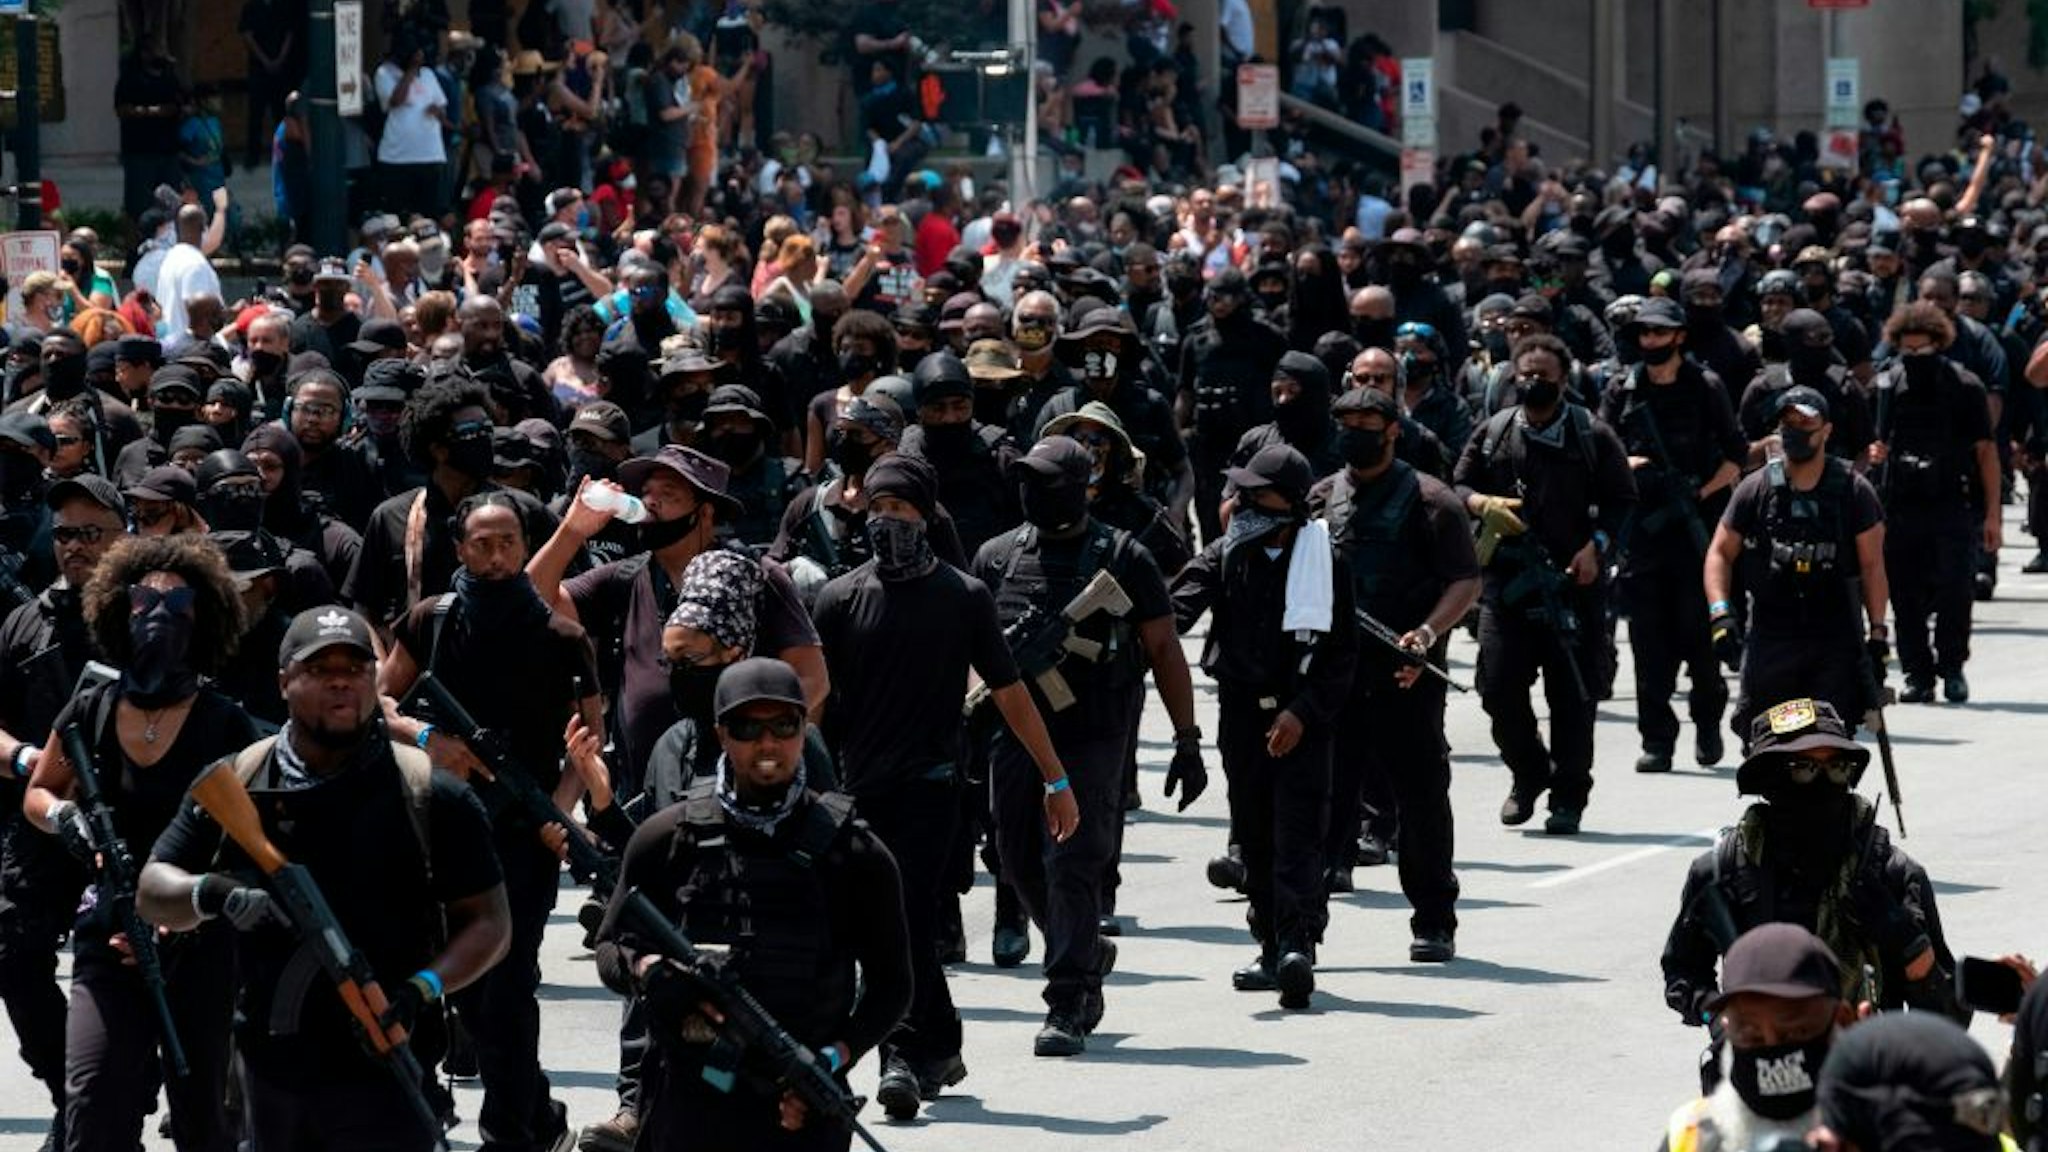 Graphic content / Members of the "Not Fucking Around Coalition" (NFAC), an all black militia, march during a rally to protest the killing of Breonna Taylor, in Louisville, Kentucky on July 25, 2020.